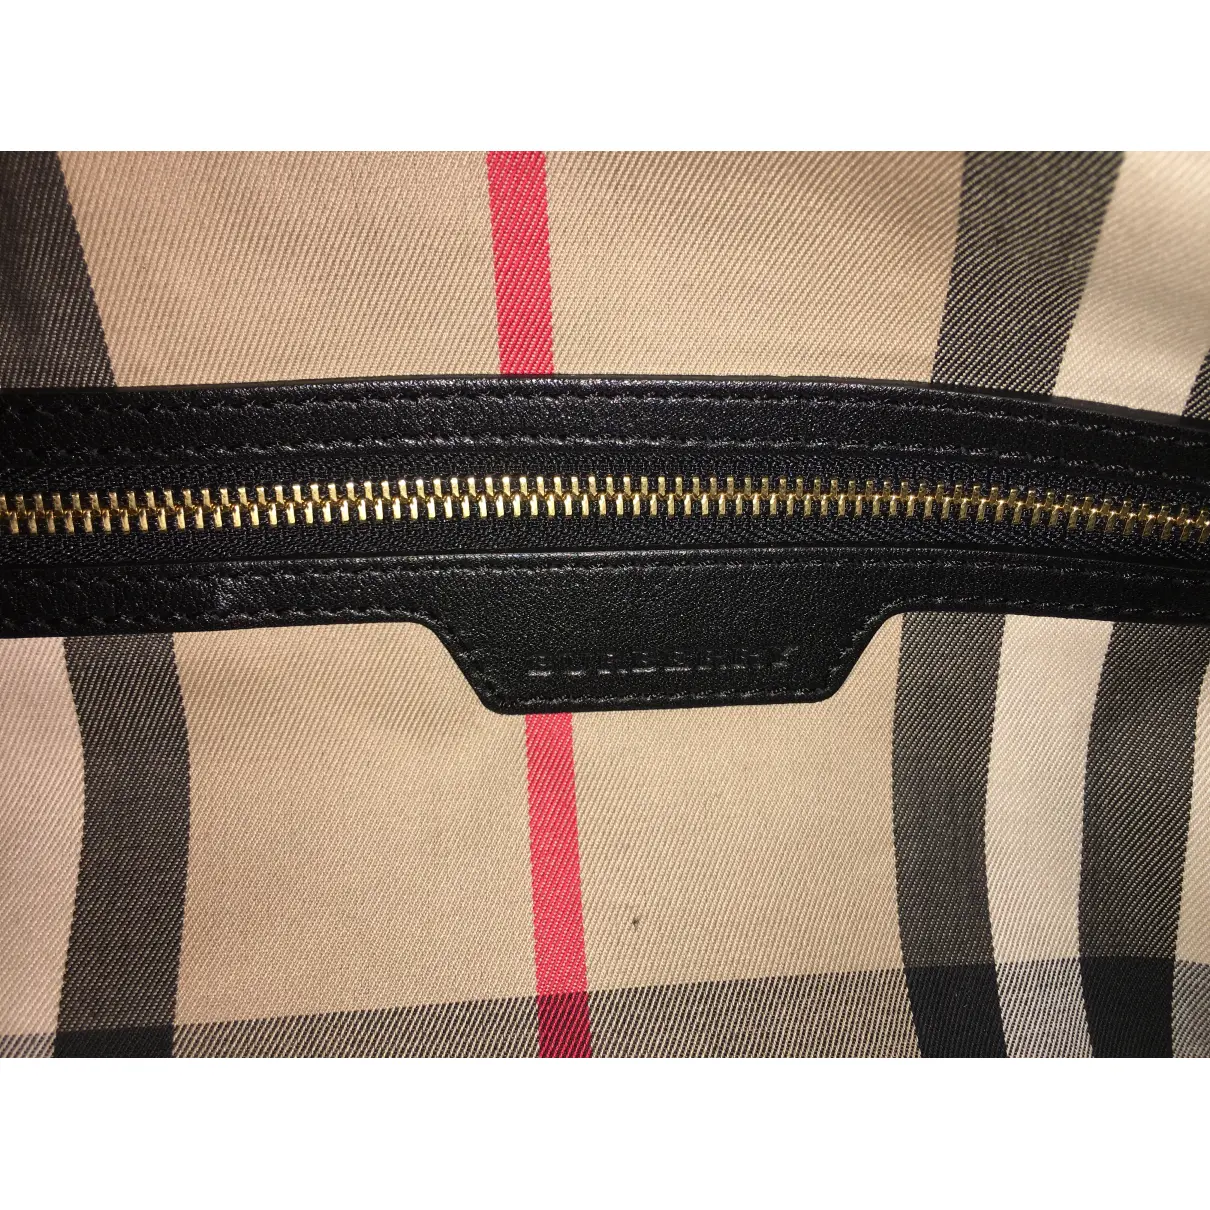 Leather weekend bag Burberry